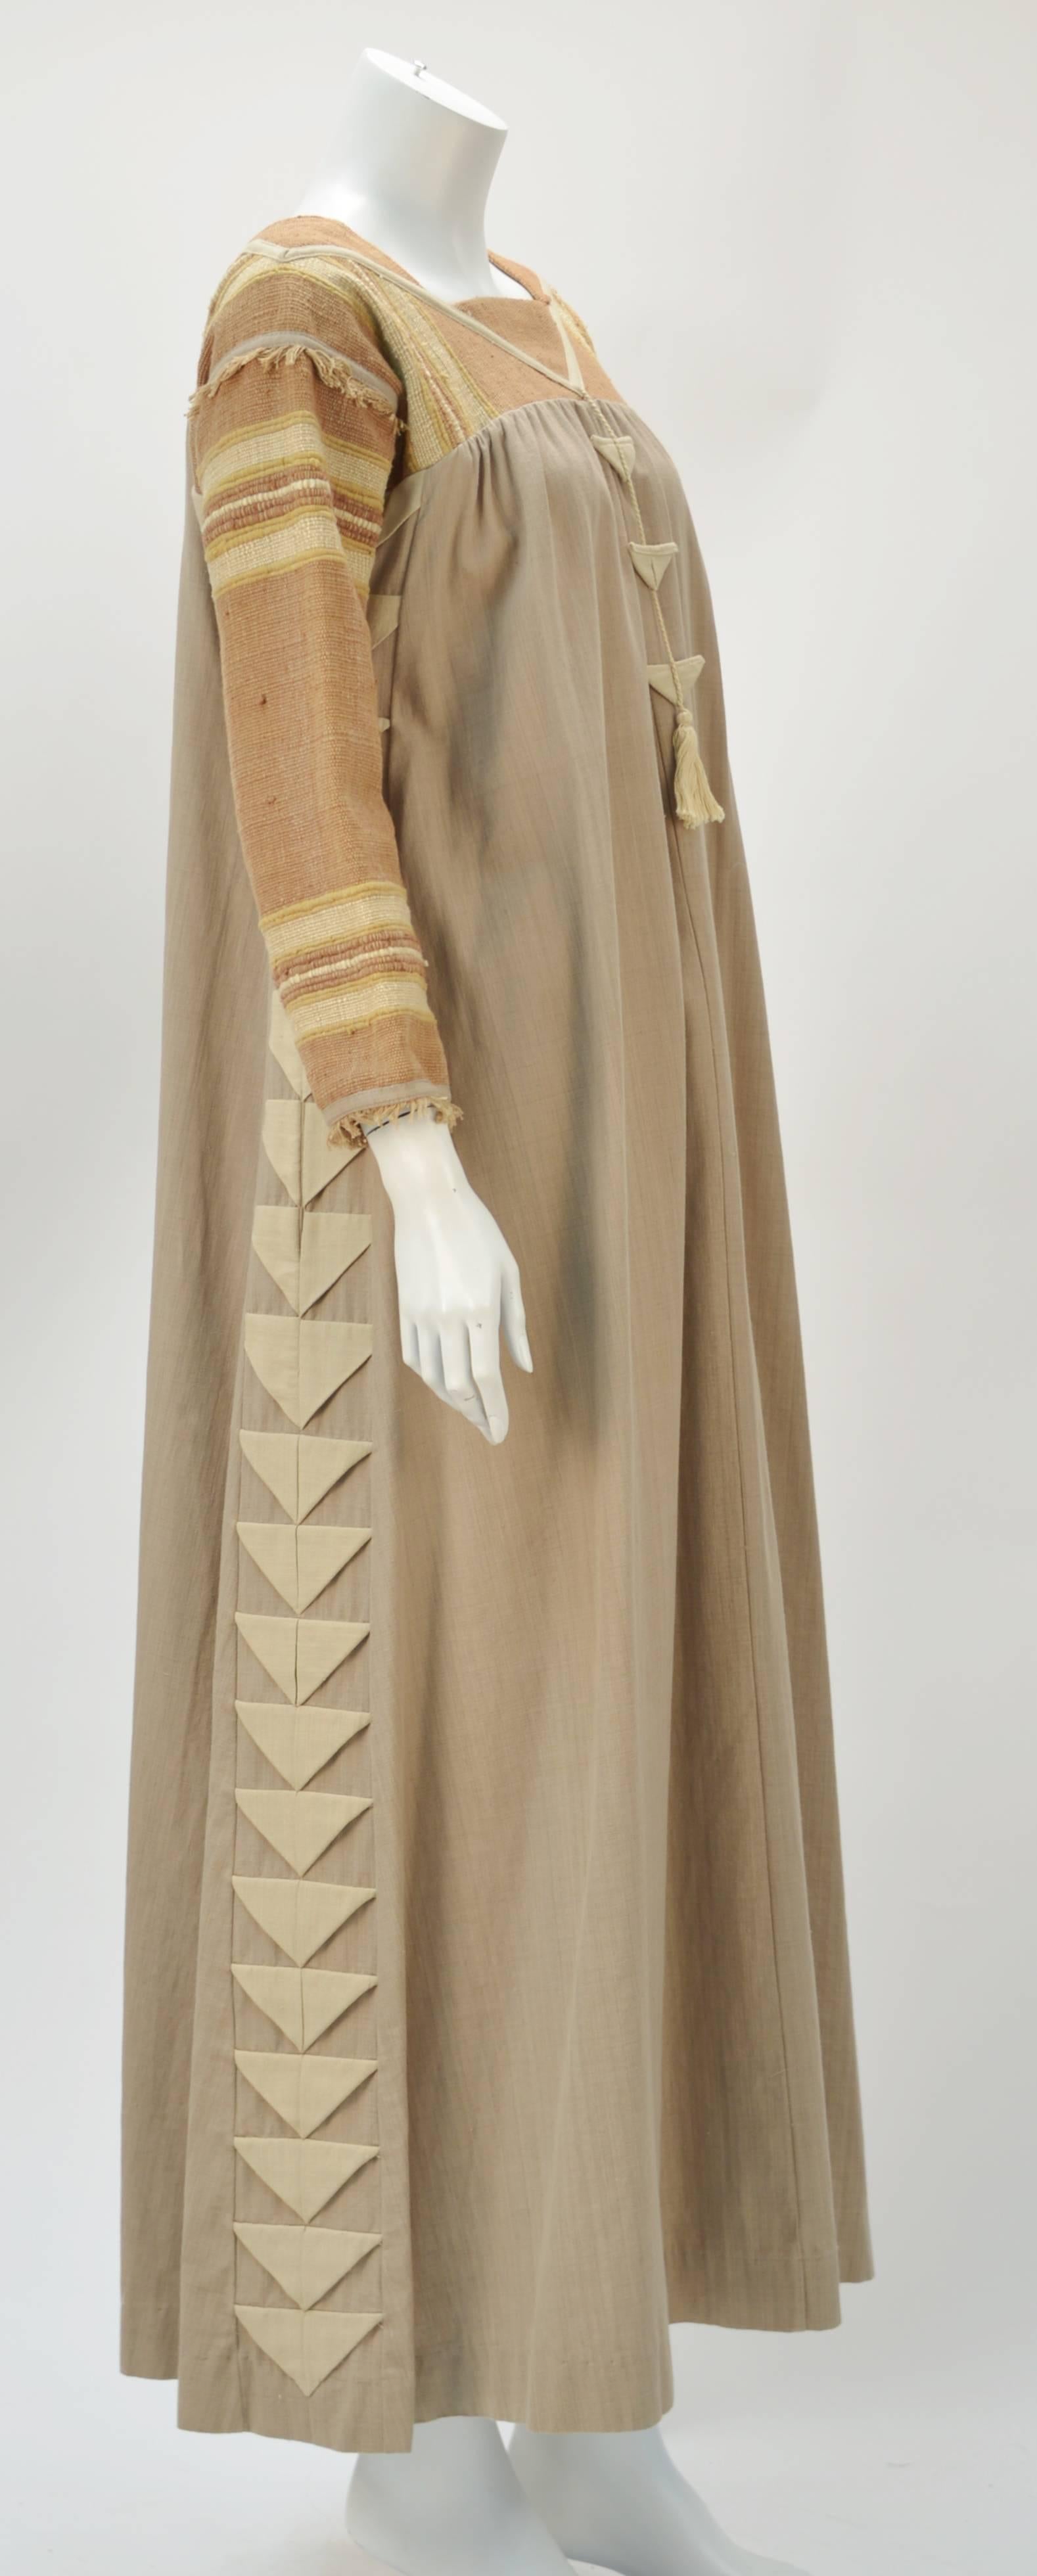 Ethnic 1970's 100% cotton tan and brown caftan by OPUS 1 by Diana Martin. Made in Mexico. Expat fashion designer settled in Guadalajara in the 1970's and created one of the hippest clothing lines and stores located in Mexico and sold to American